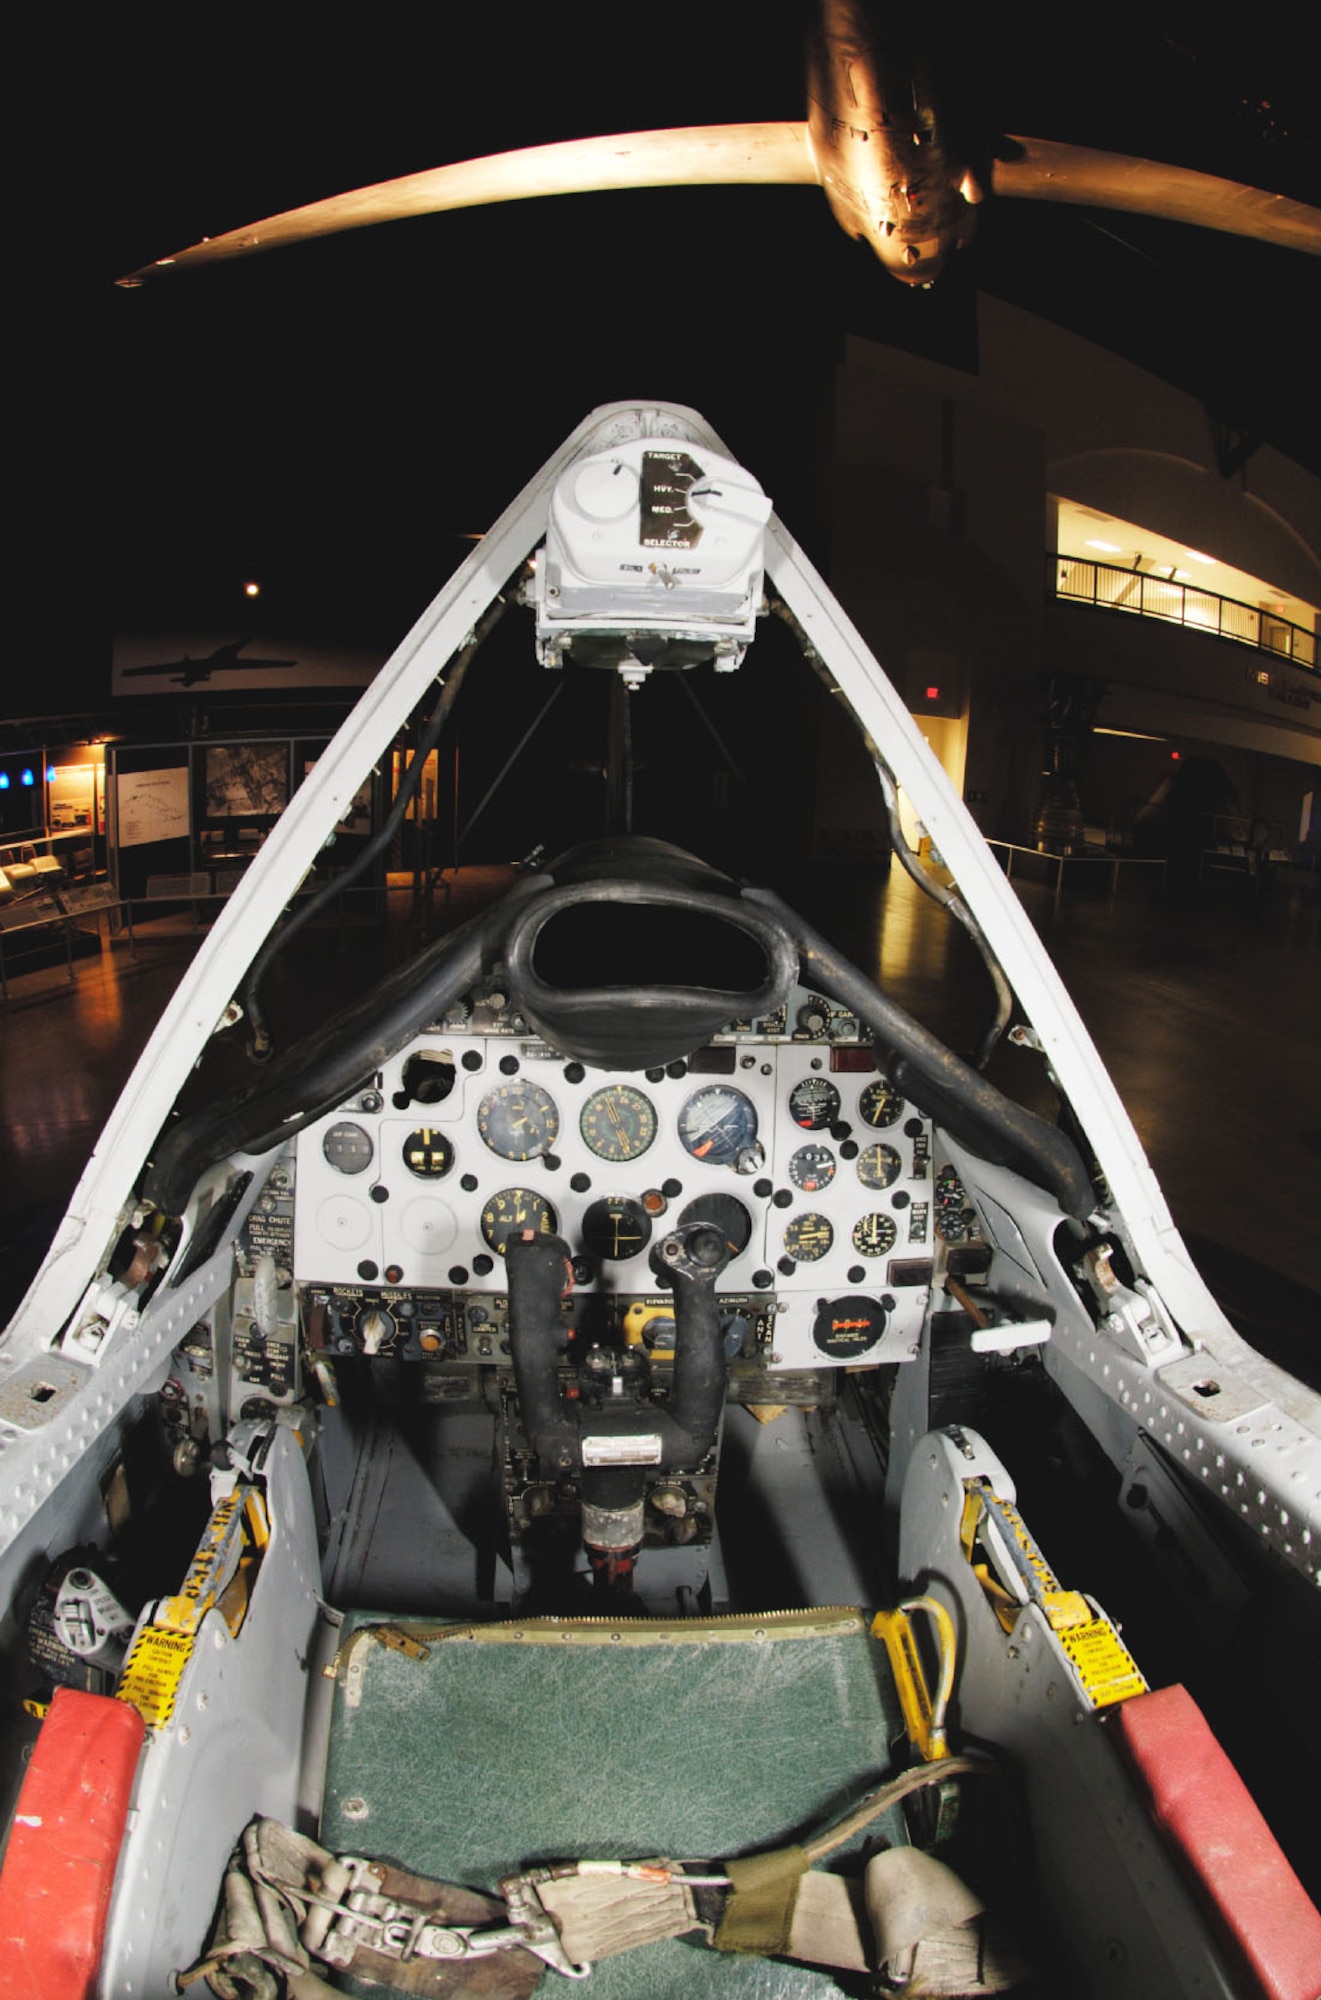 DAYTON, Ohio -- Convair F-102A cockpit at the National Museum of the United States Air Force. (Photo courtesy of John Rossino, Lockheed Martin Code One)